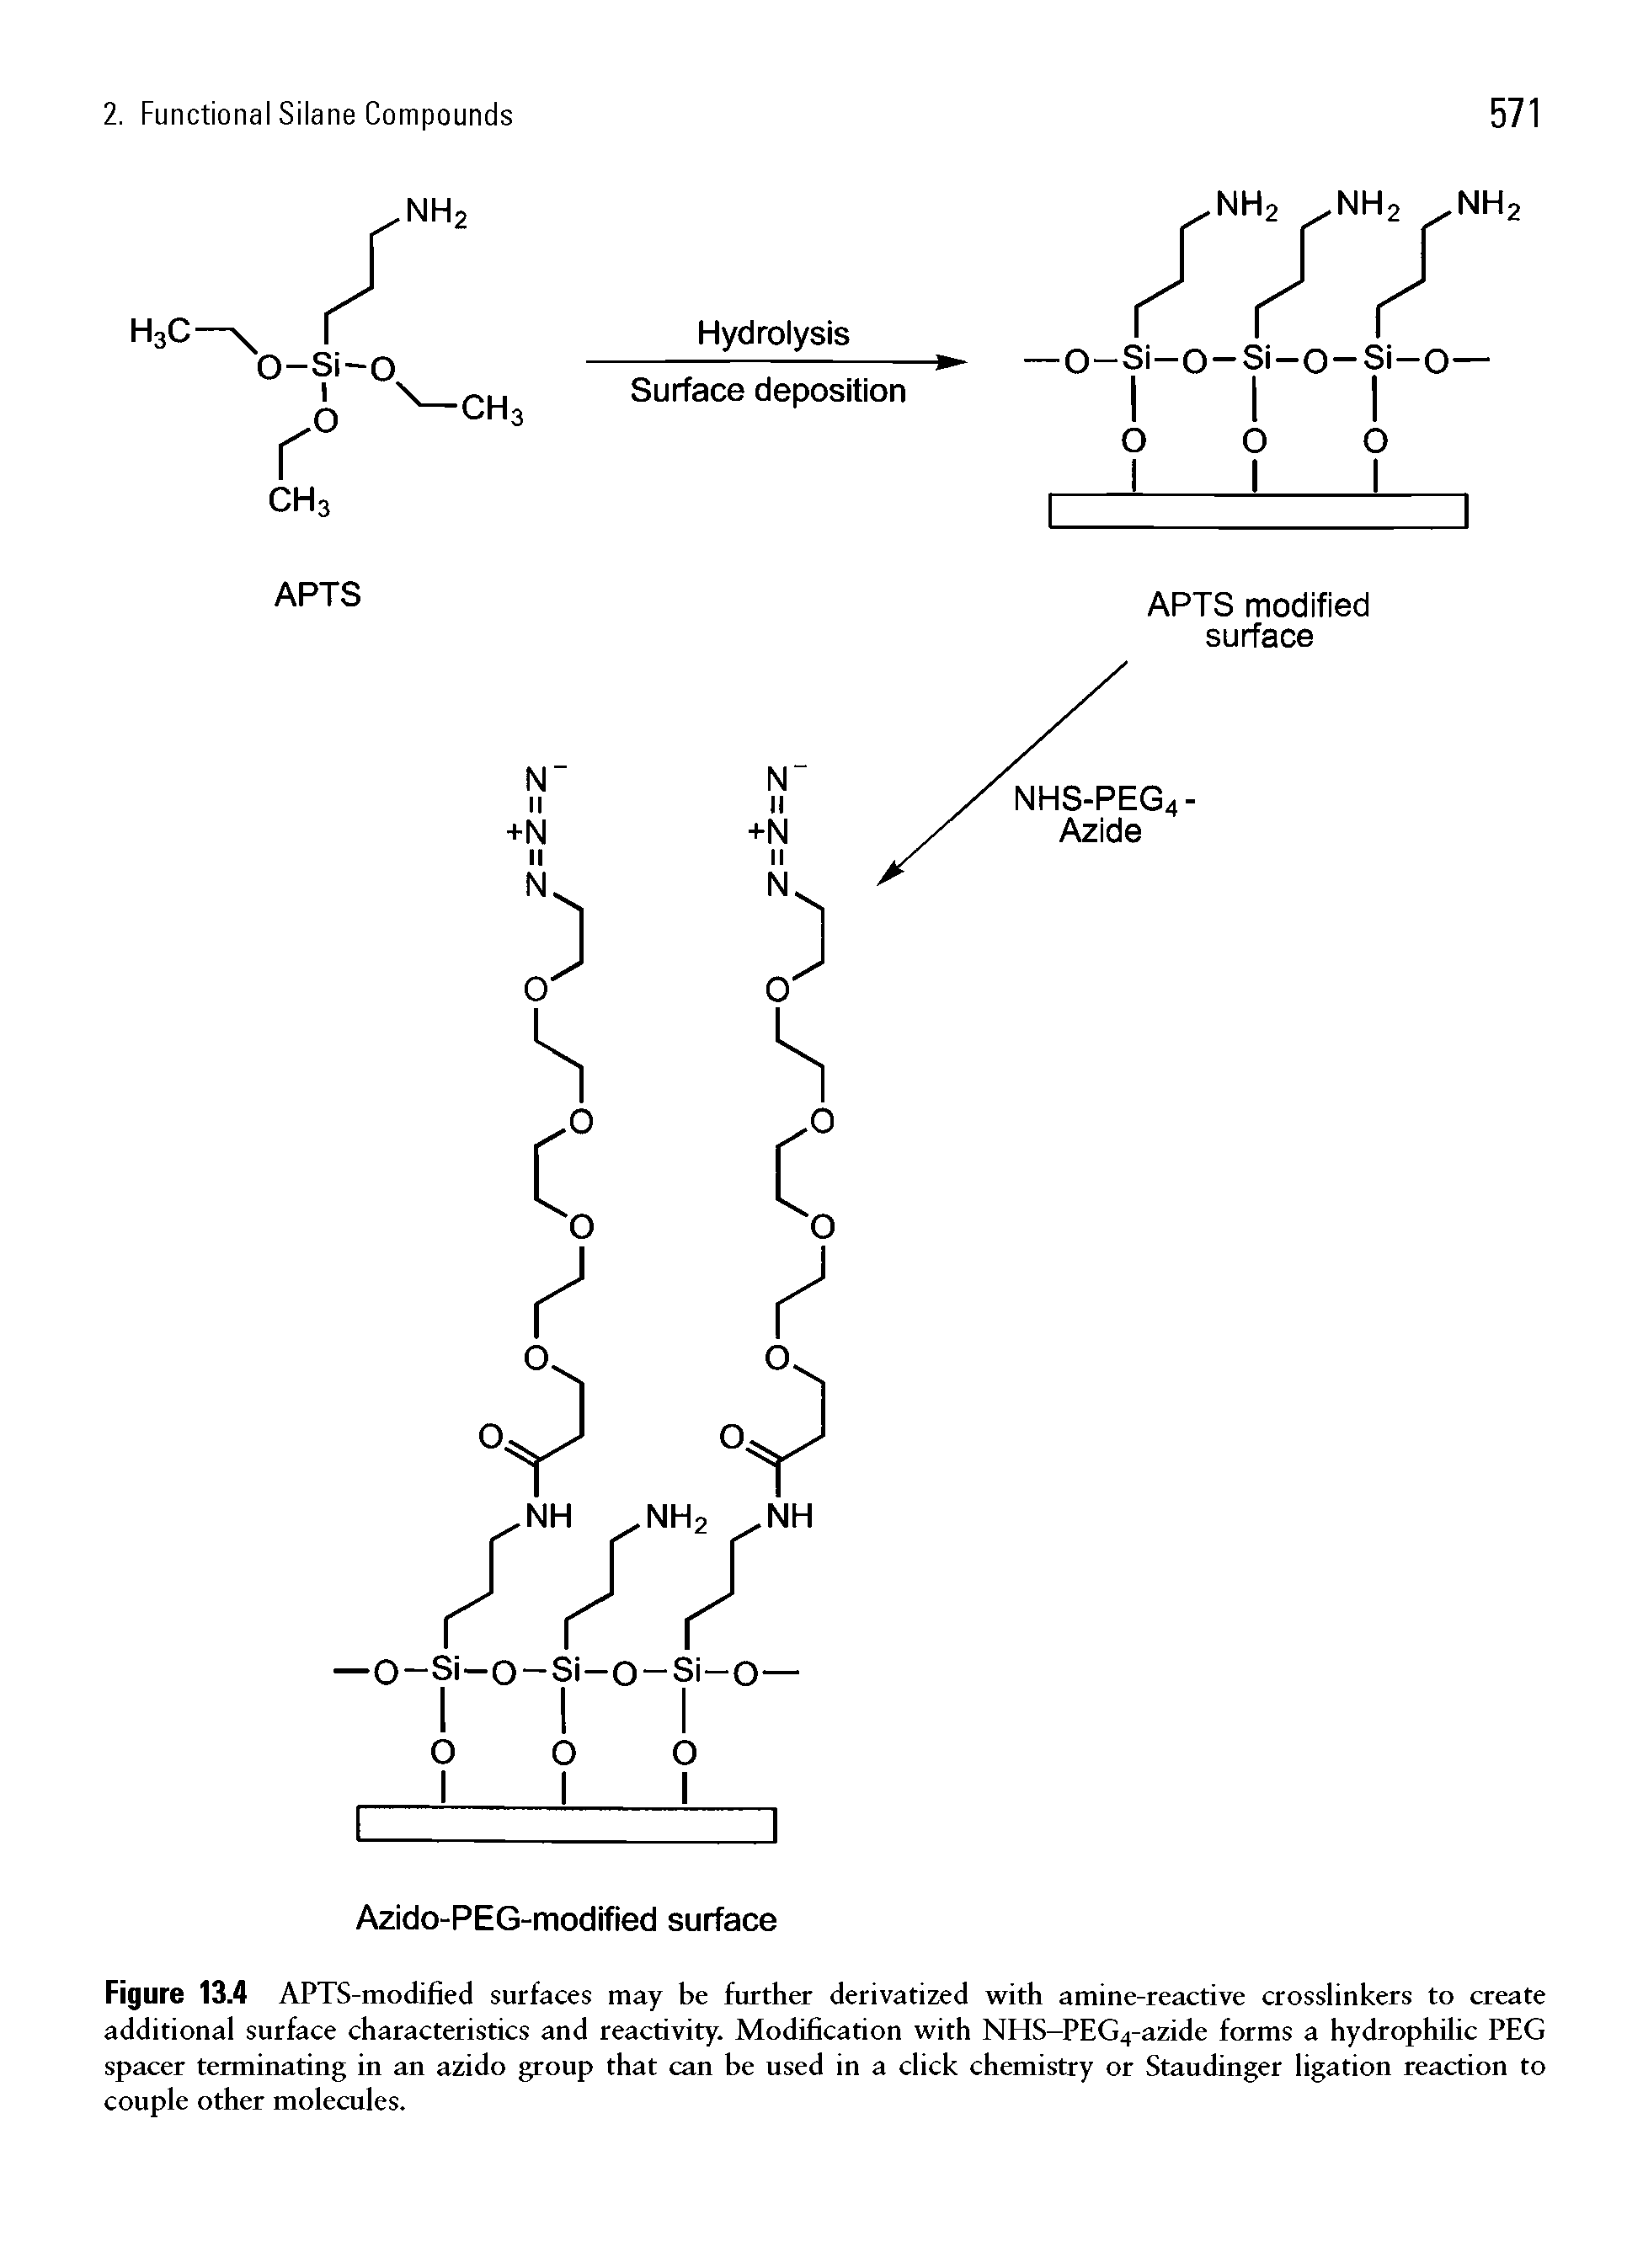 Figure 13.4 APTS-modified surfaces may be further derivatized with amine-reactive crosslinkers to create additional surface characteristics and reactivity. Modification with NHS-PEG4-azide forms a hydrophilic PEG spacer terminating in an azido group that can be used in a click chemistry or Staudinger ligation reaction to couple other molecules.